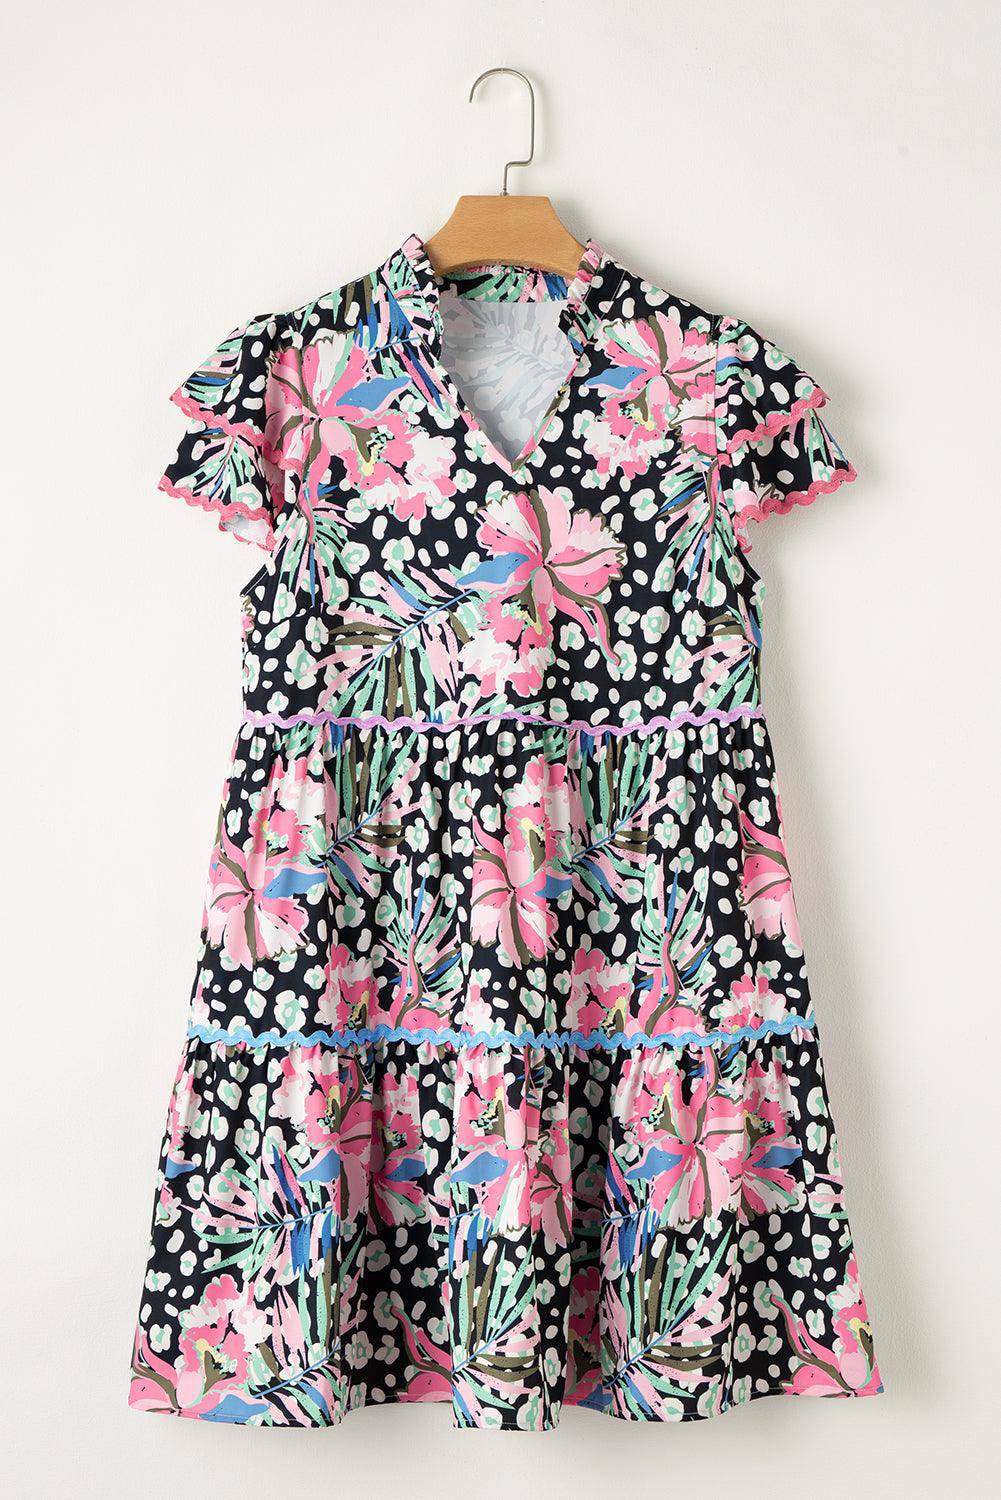 Pink Floral Short Sleeve Tiered Mini Dress for Summer